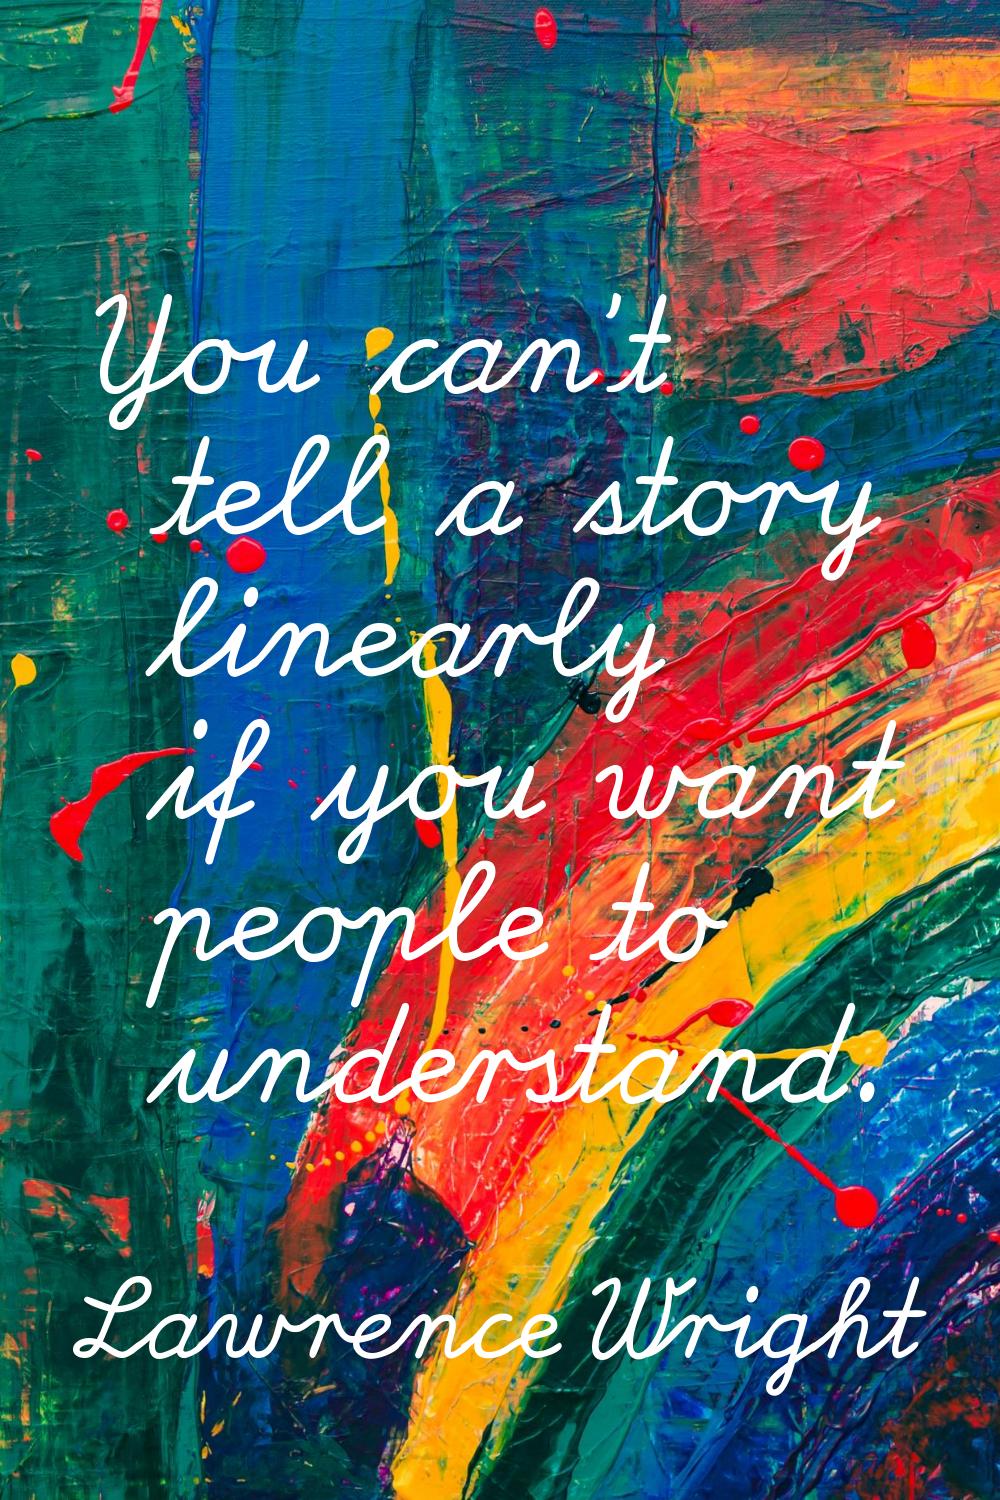 You can't tell a story linearly if you want people to understand.